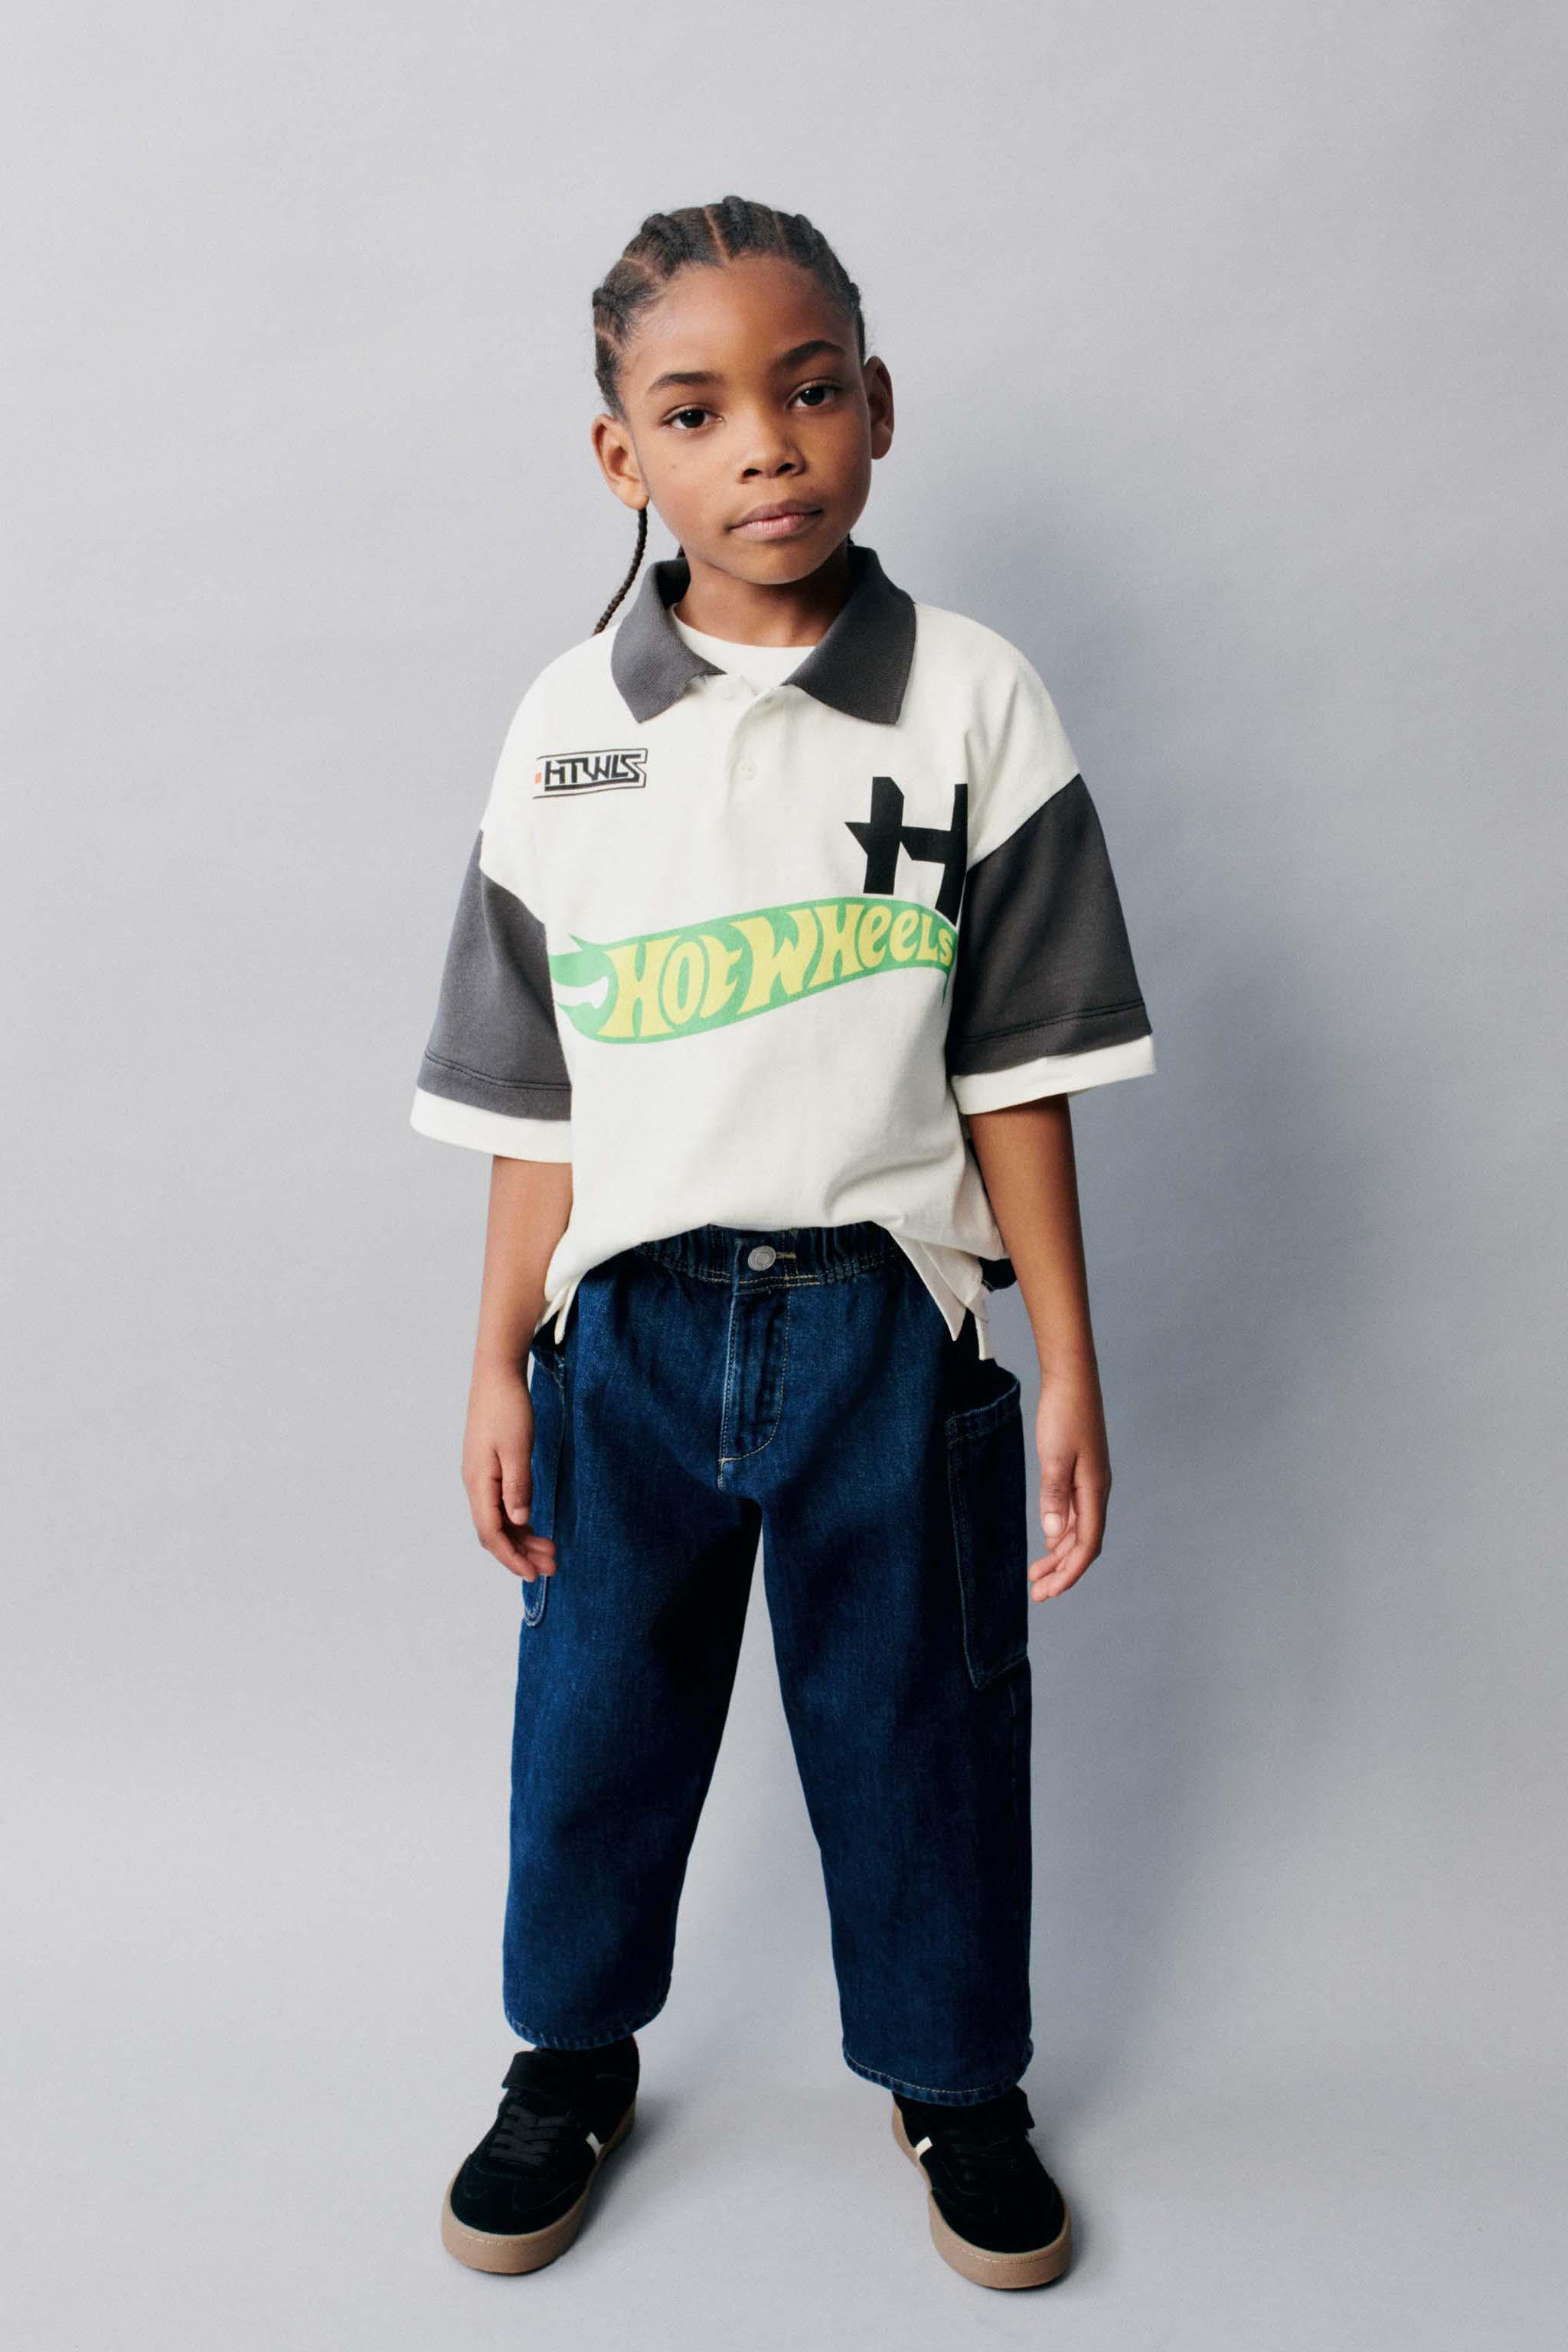 Zara launches kids' Jeans Redesign collection - TEXtalks